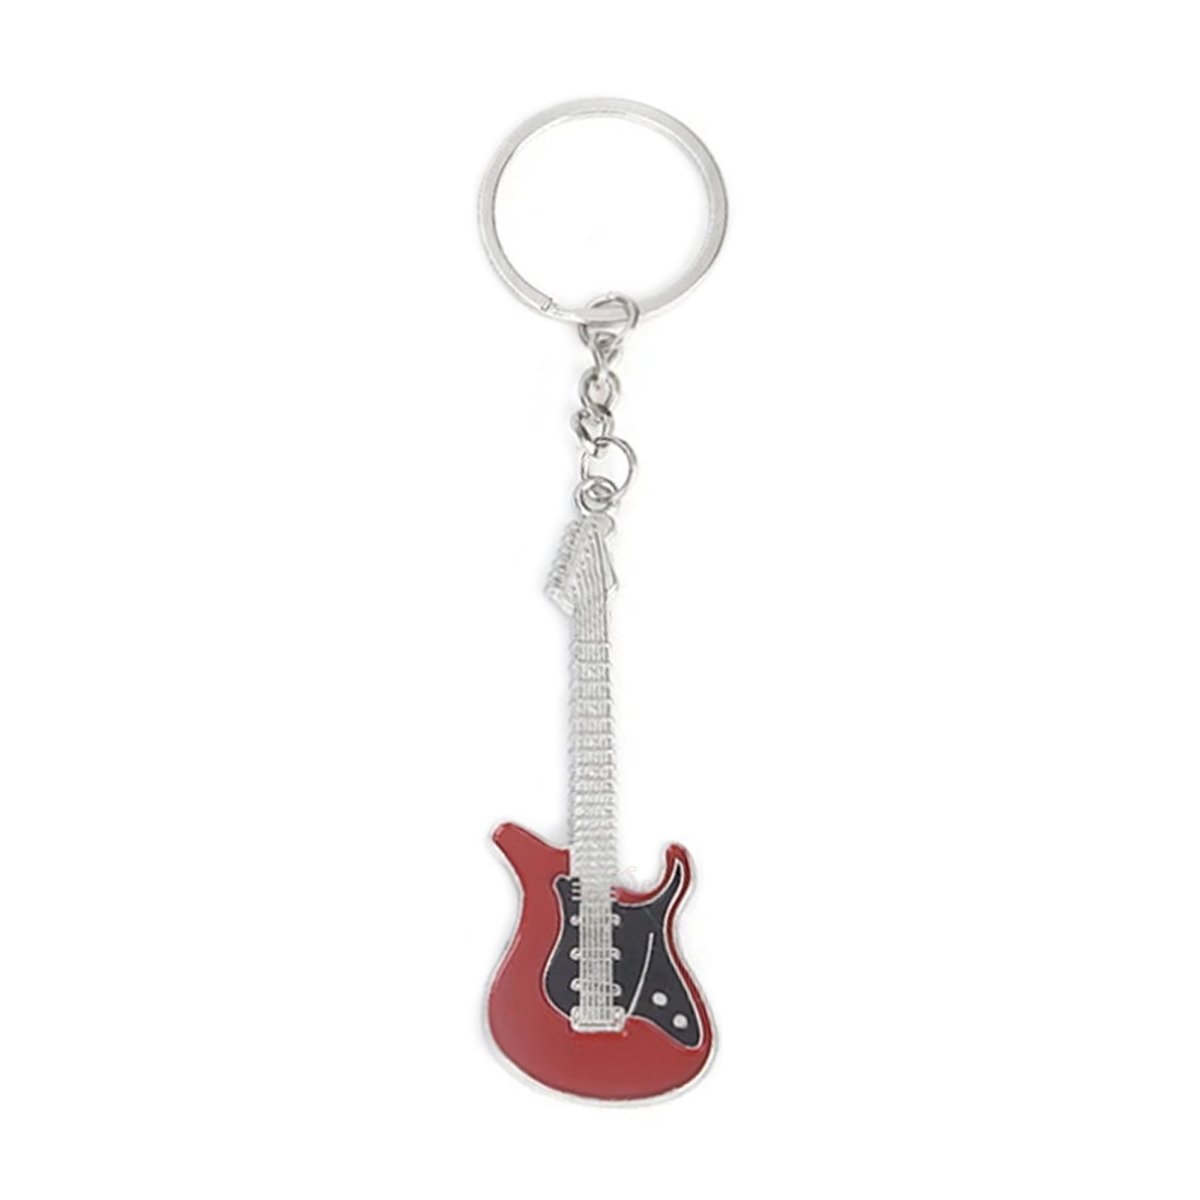 30mm Keyring Guitar Keychain 7.5cm Key Ring Key Chain Bag Accessory Holder Pendant Tag - Red - - Asia Sell